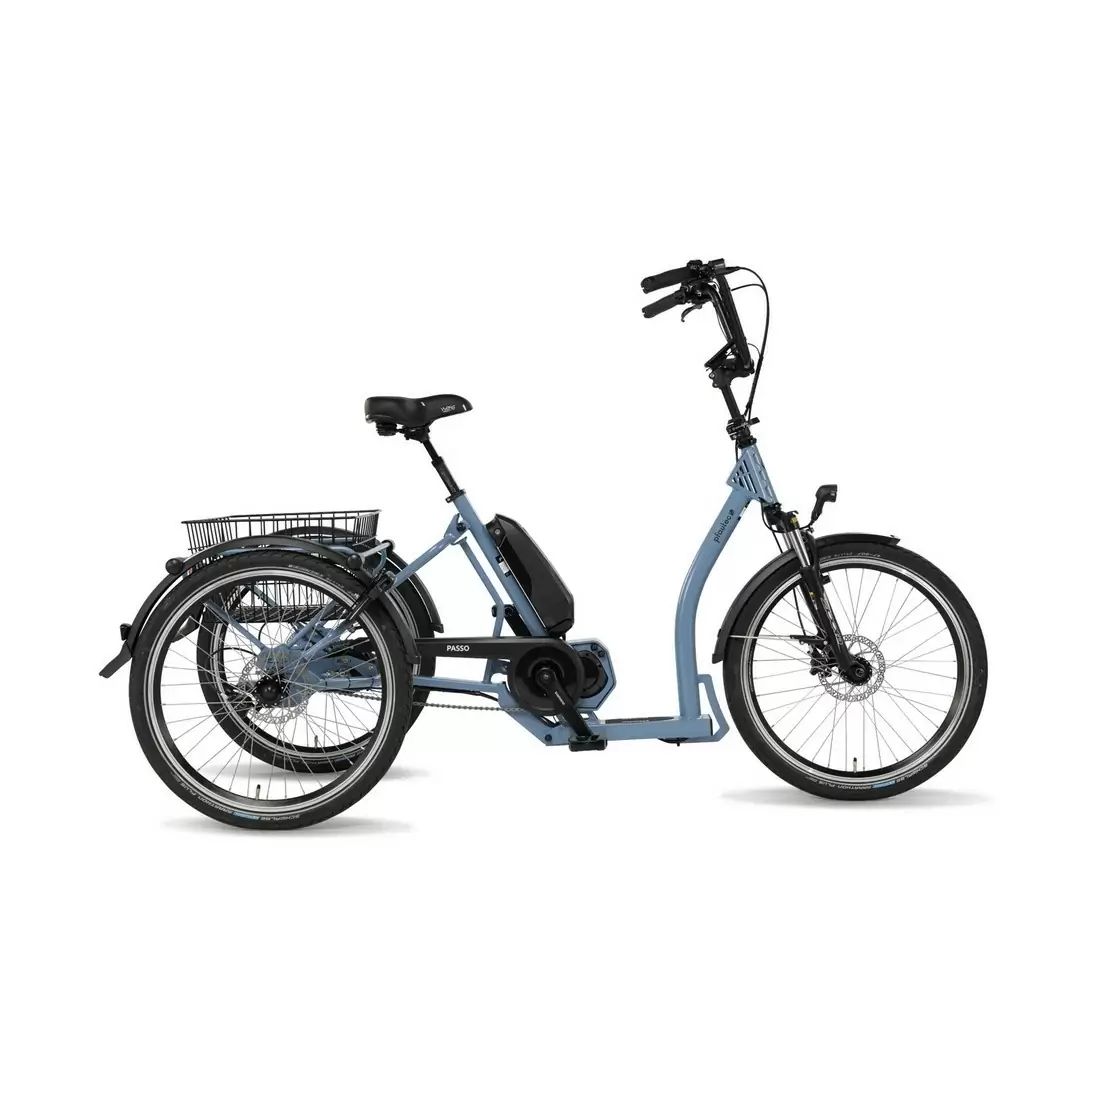 Electric Tricycle Wheelbase 24'' 5v 504Wh Shimano STEPS DUE6100 Blue One Size - image